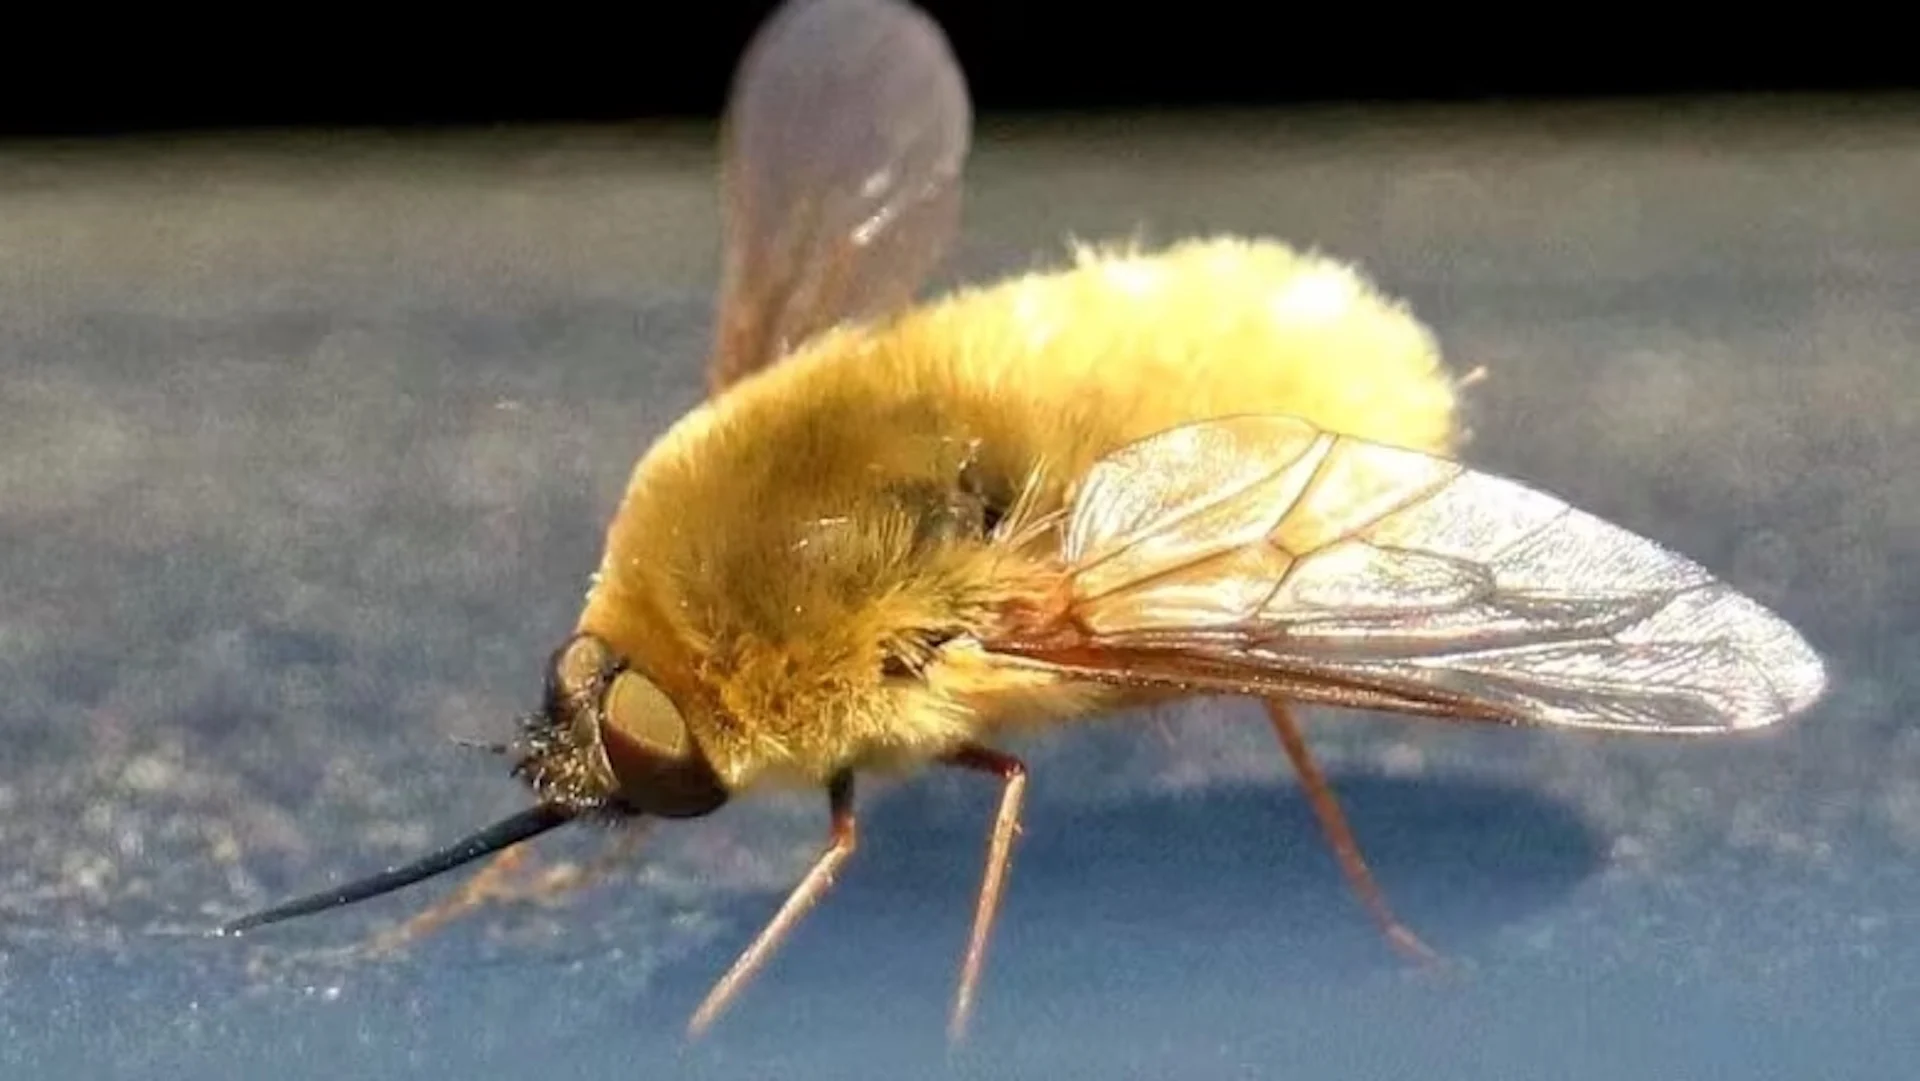 Missing bees in your garden this summer? Bee flies might be to blame